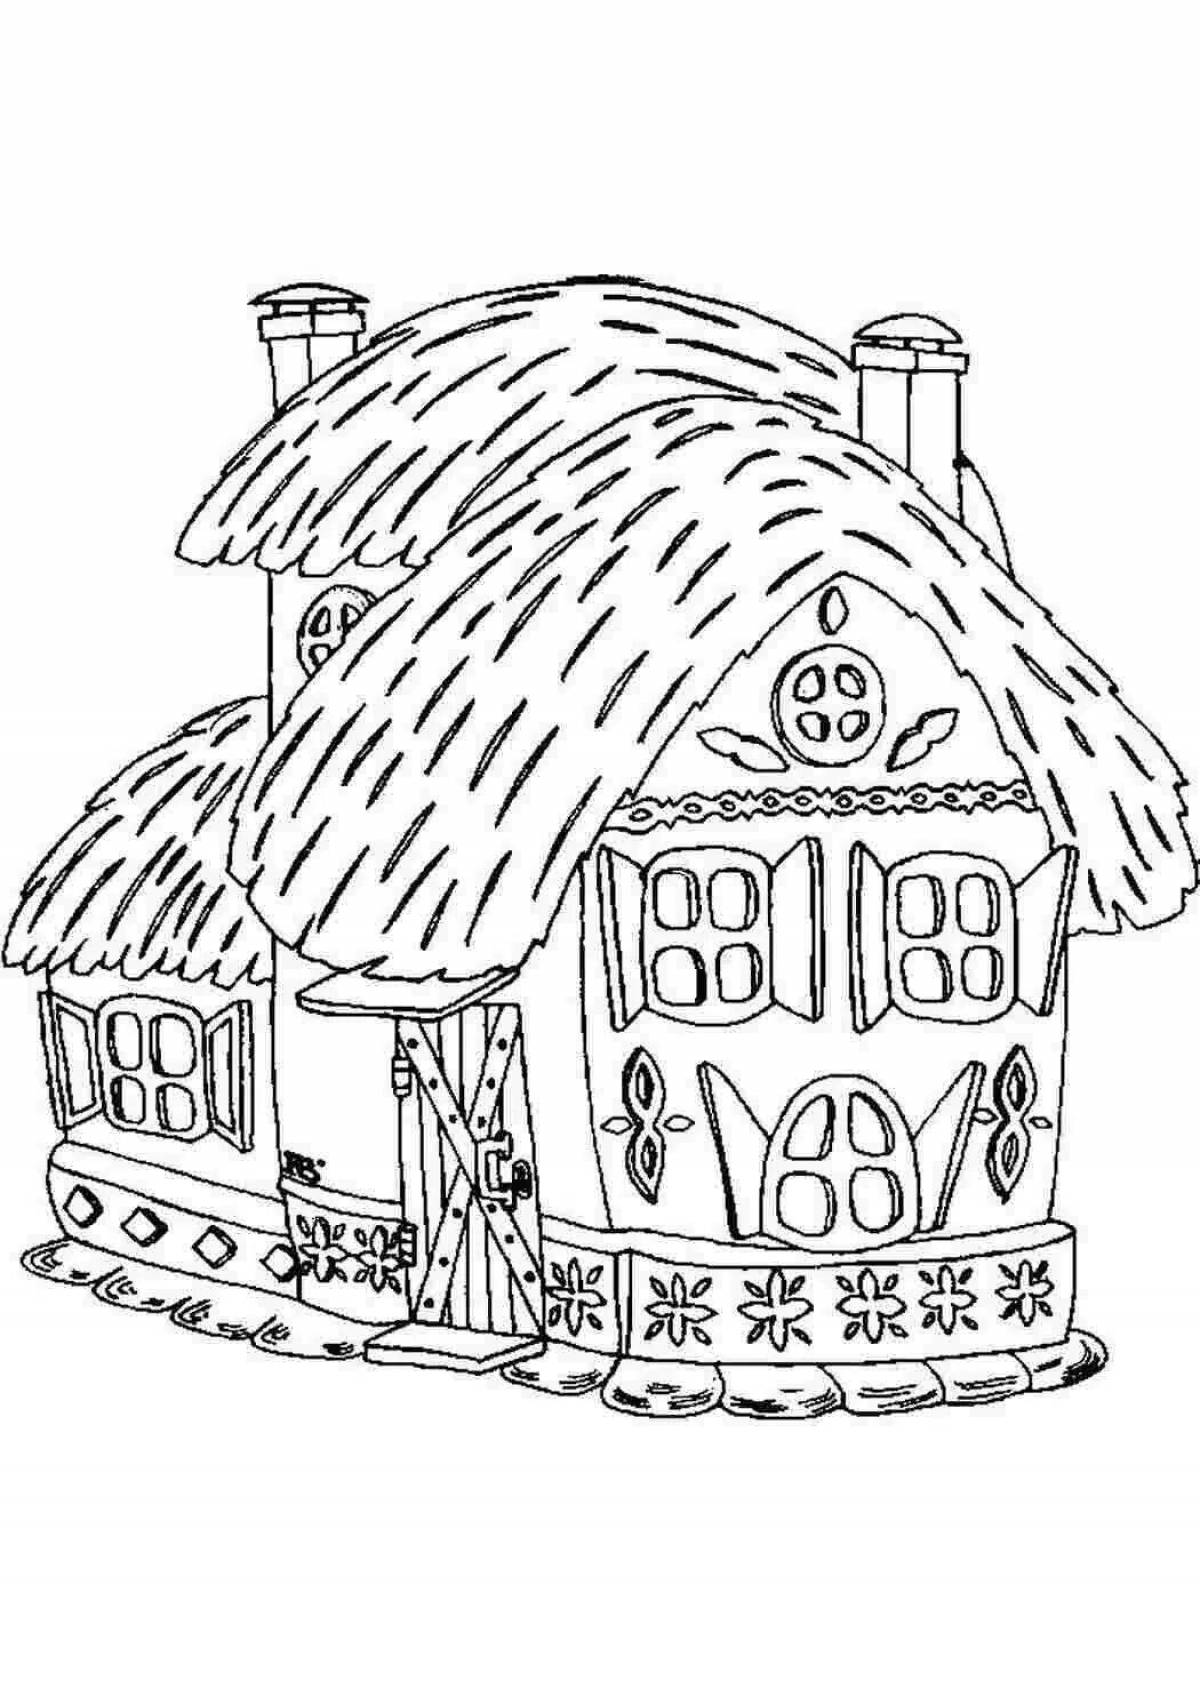 Attractive drawing of a house